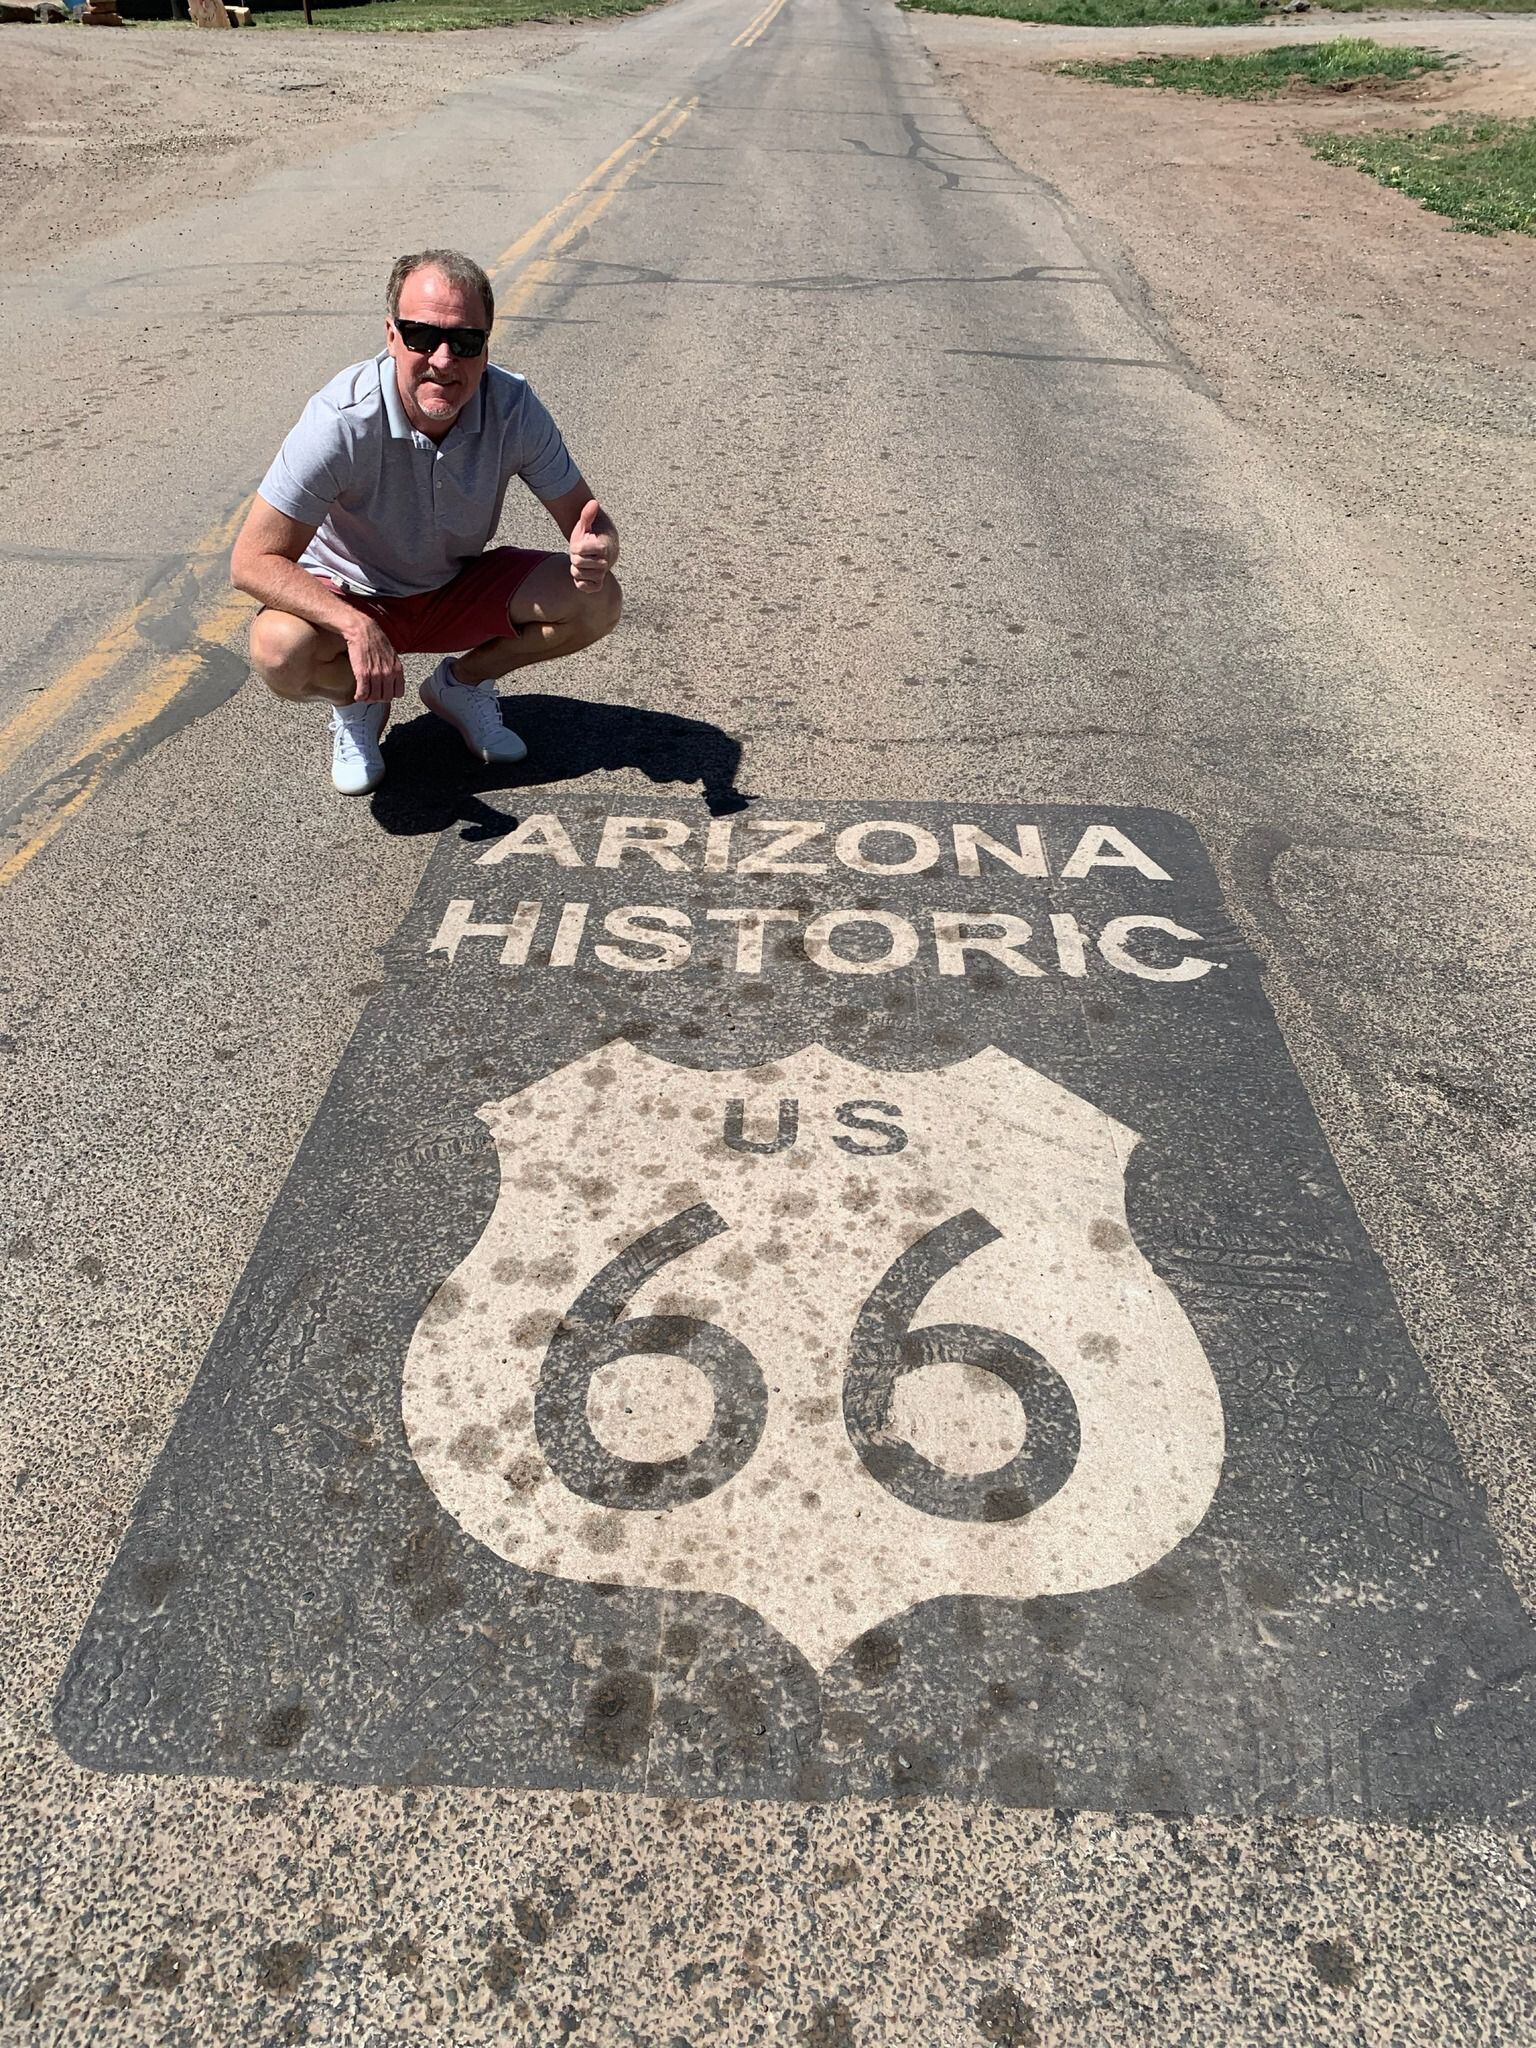 Scott poses with a painted shield, signifying an original stretch of Route 66.